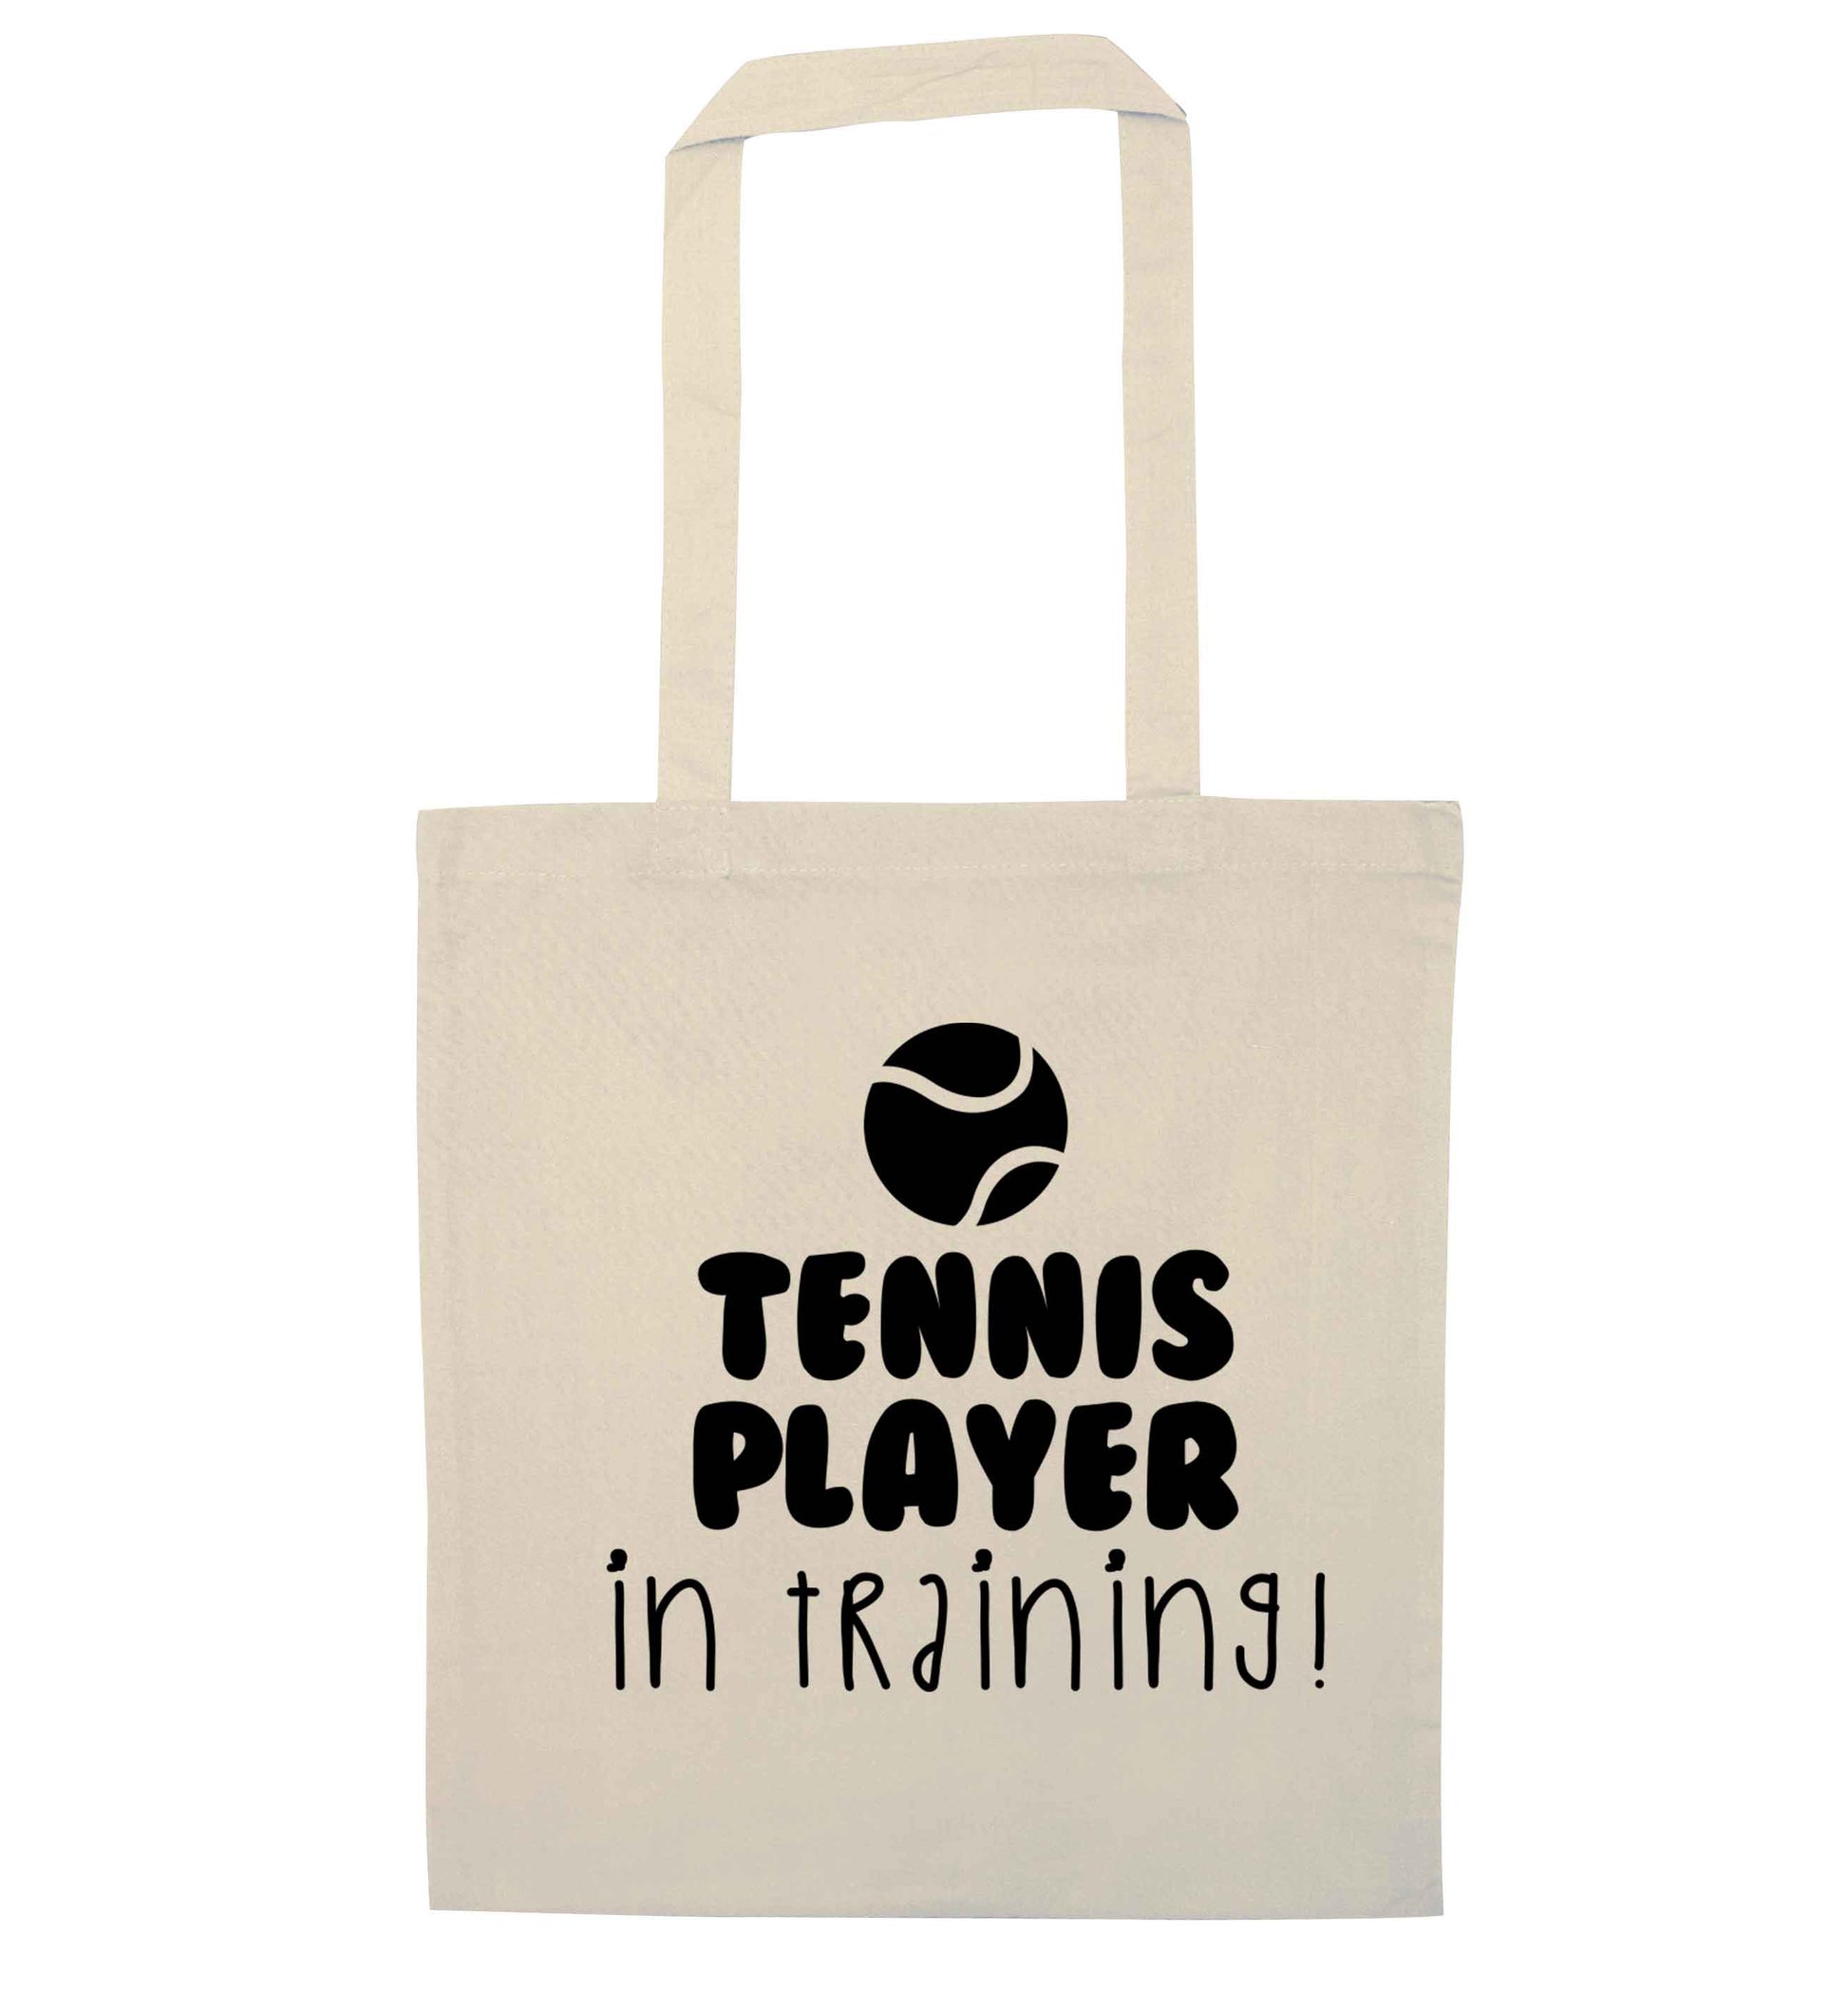 Tennis player in training natural tote bag